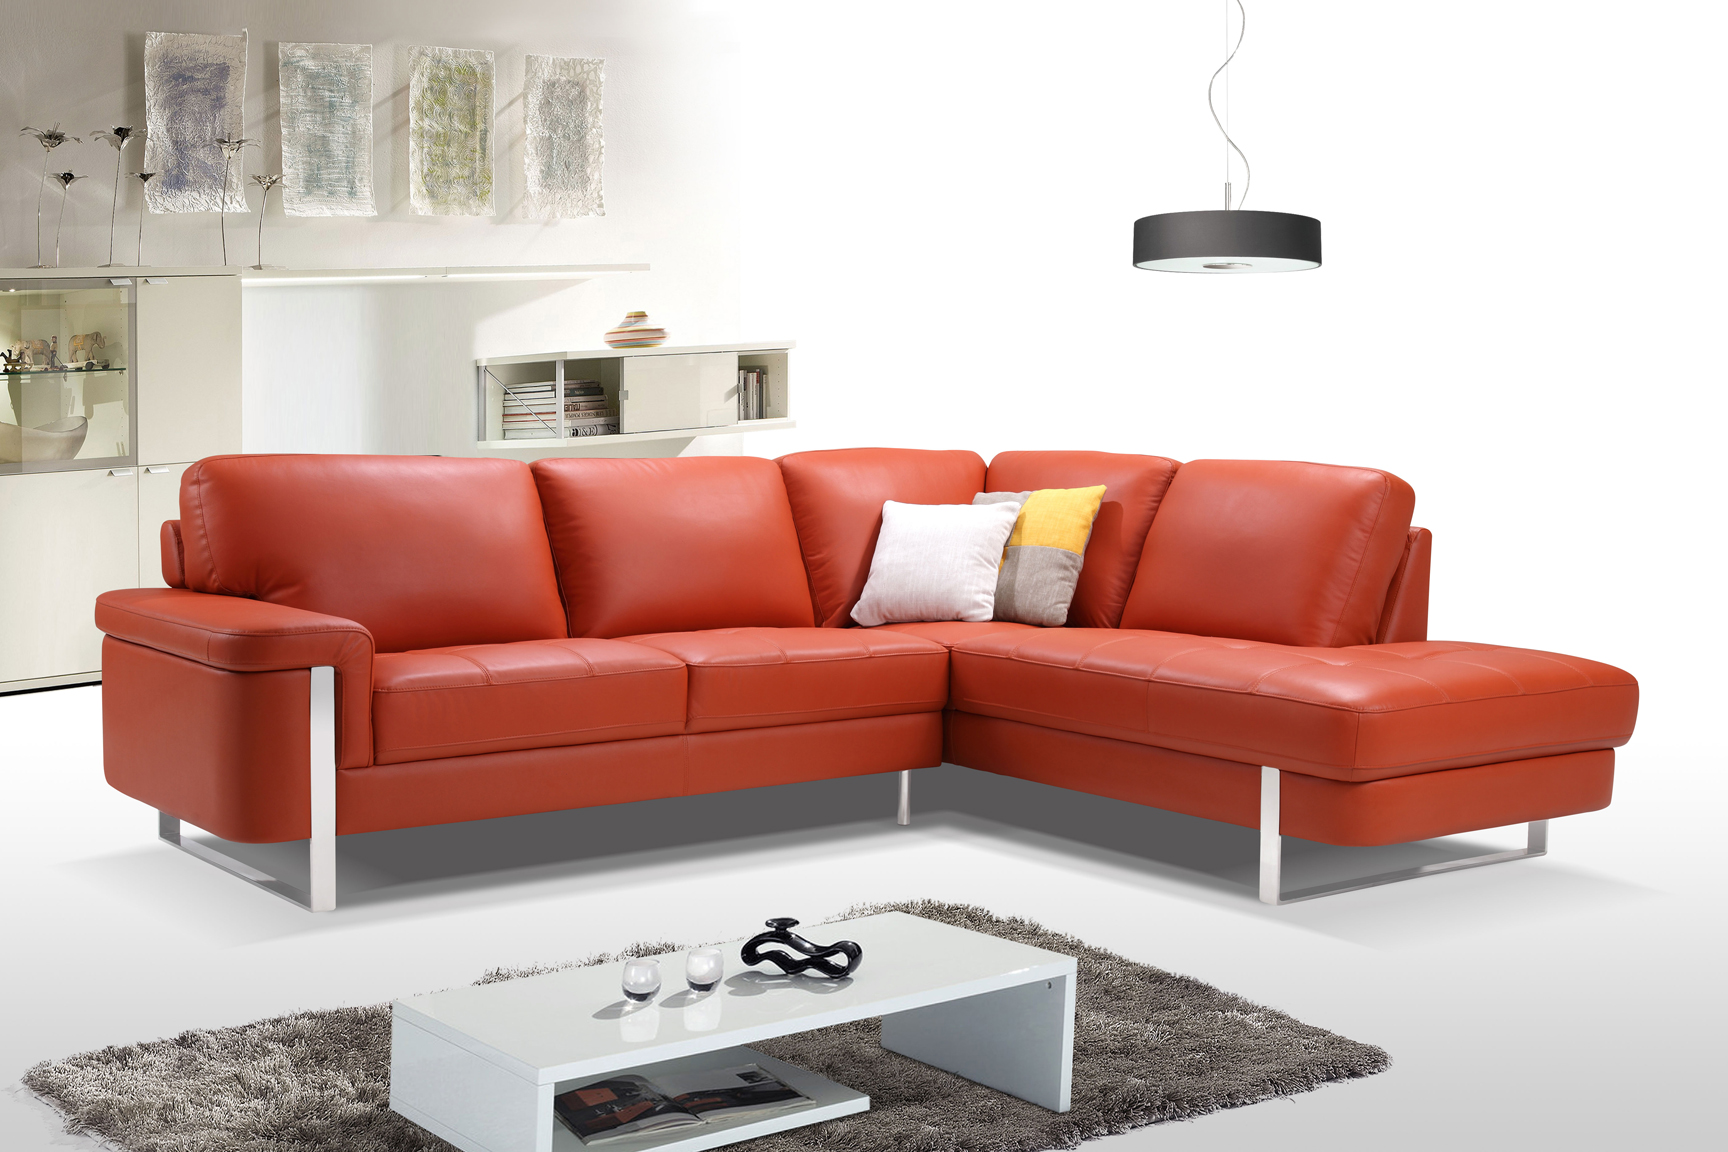 Living Room Furniture Sleepers Sofas Loveseats and Chairs FD2392